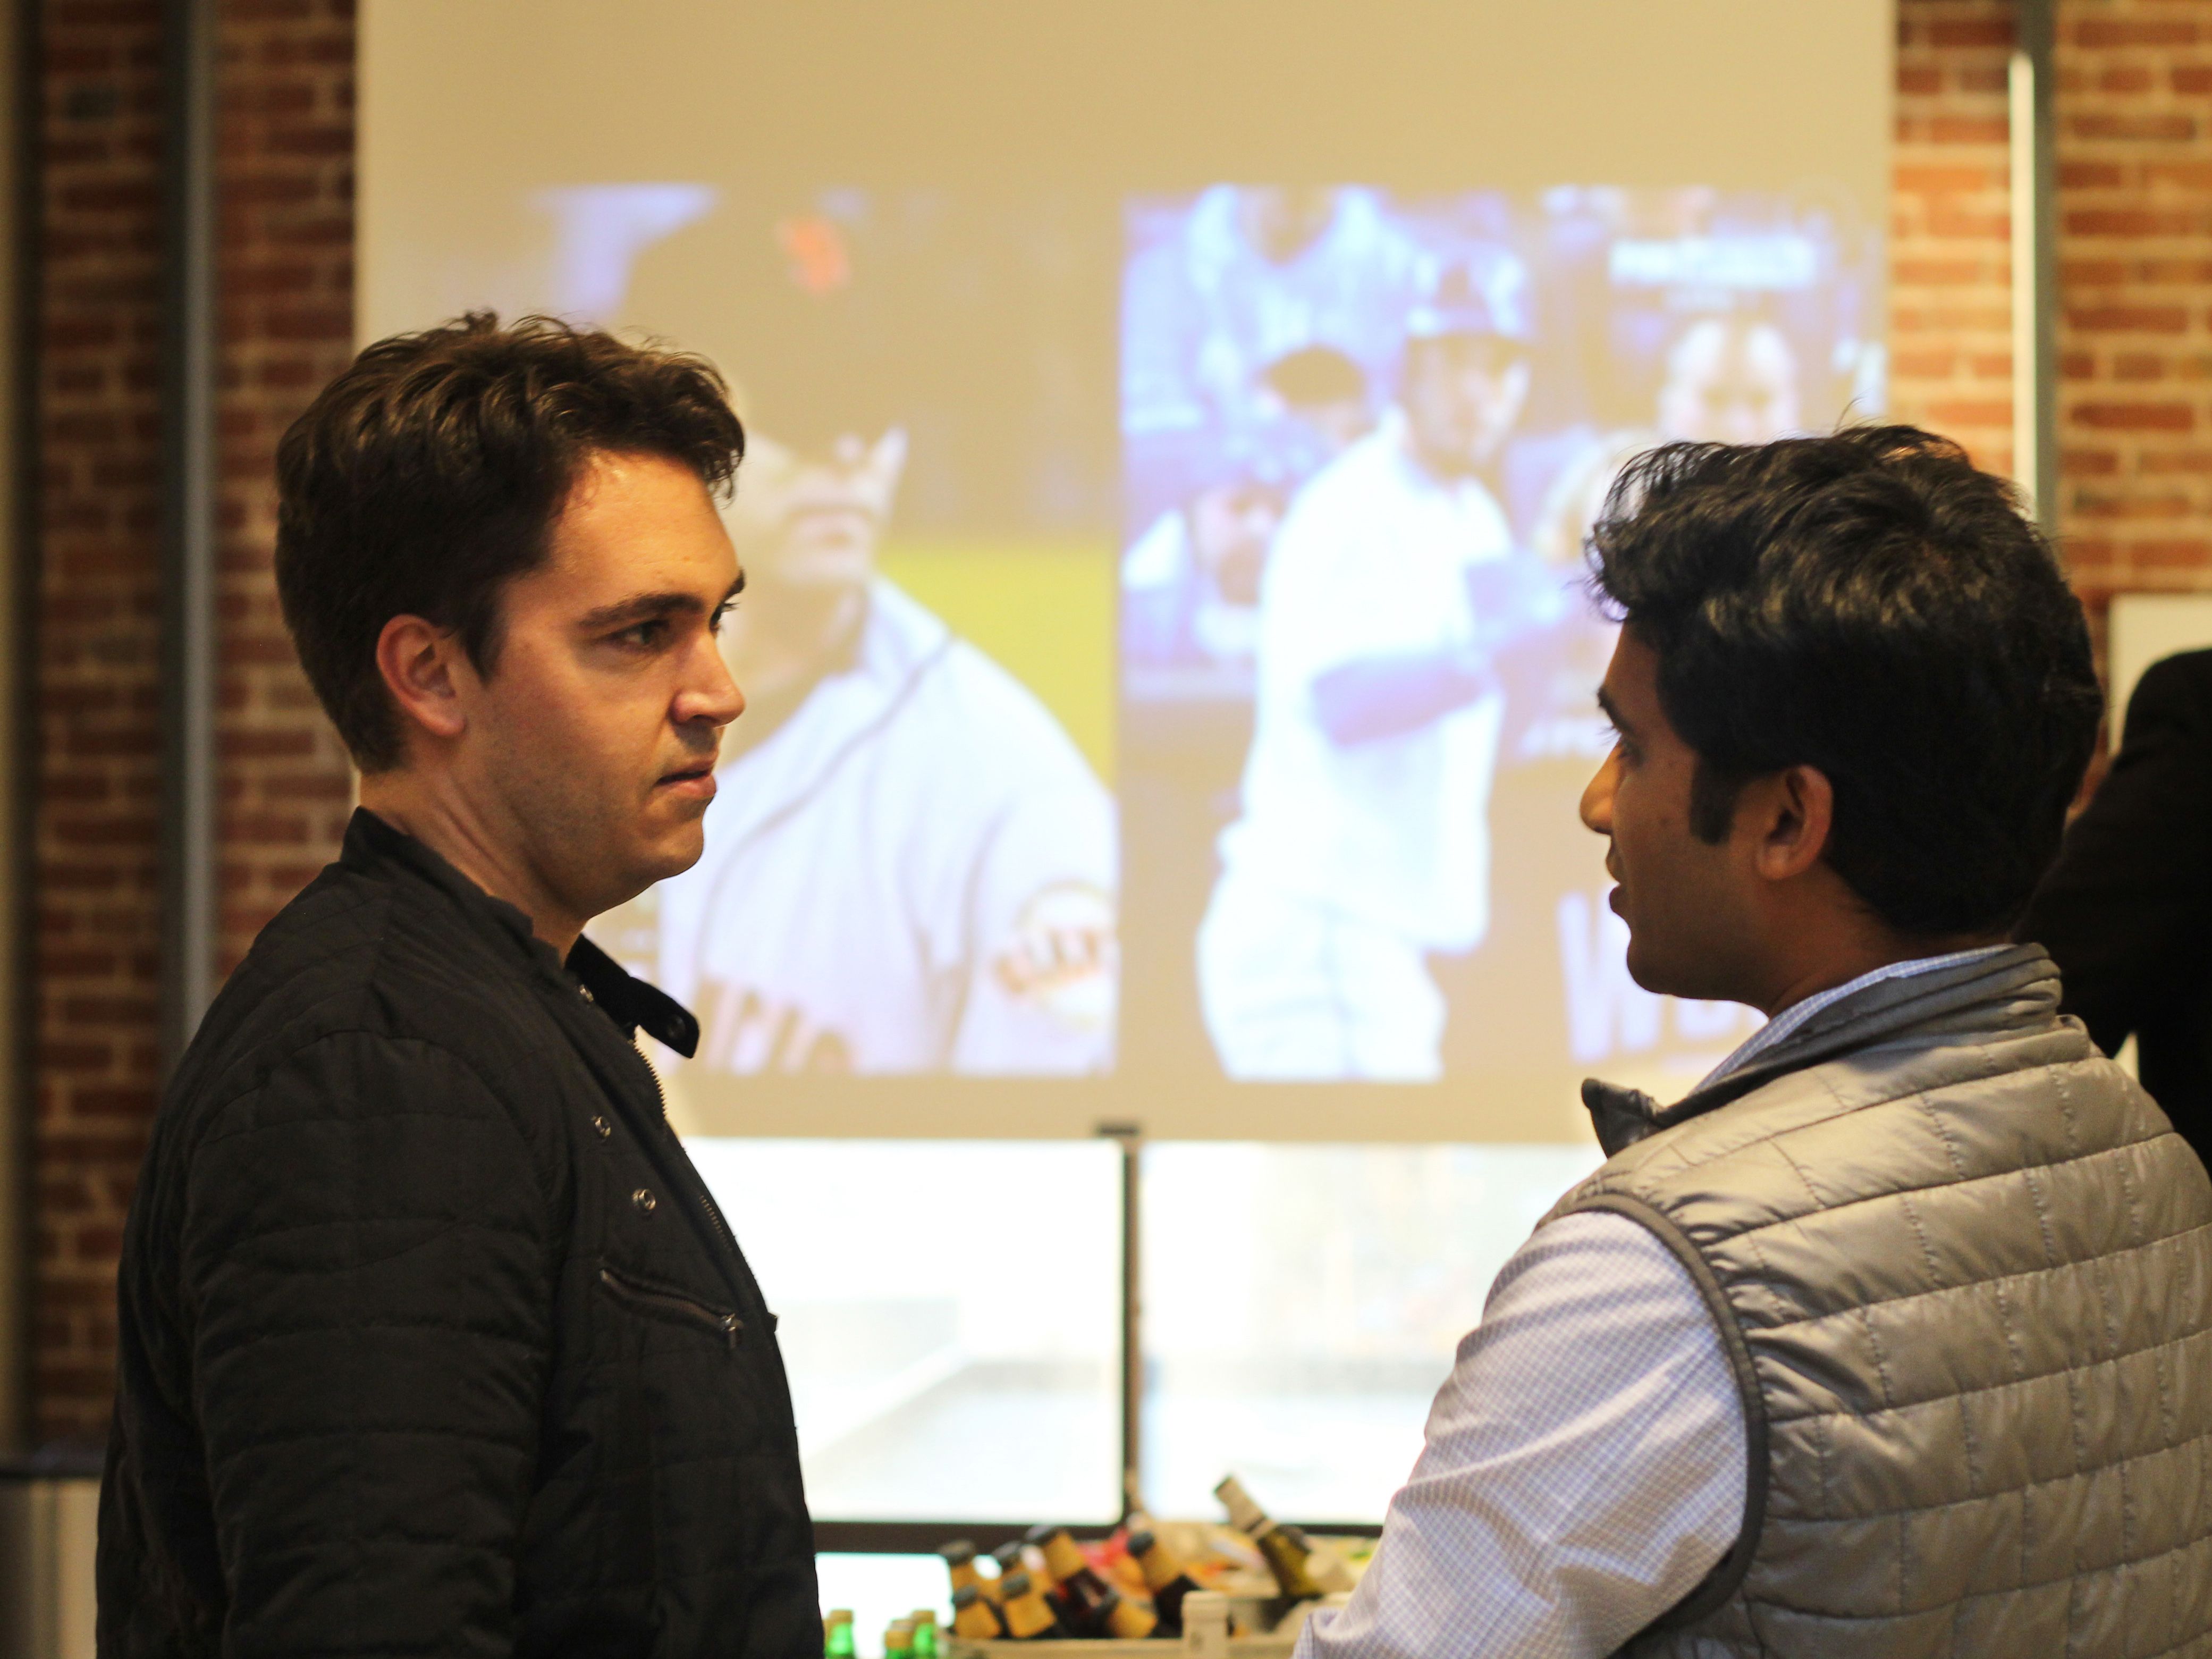 David Byttow, founder and CEO of Secret with Shardul Shah of Index